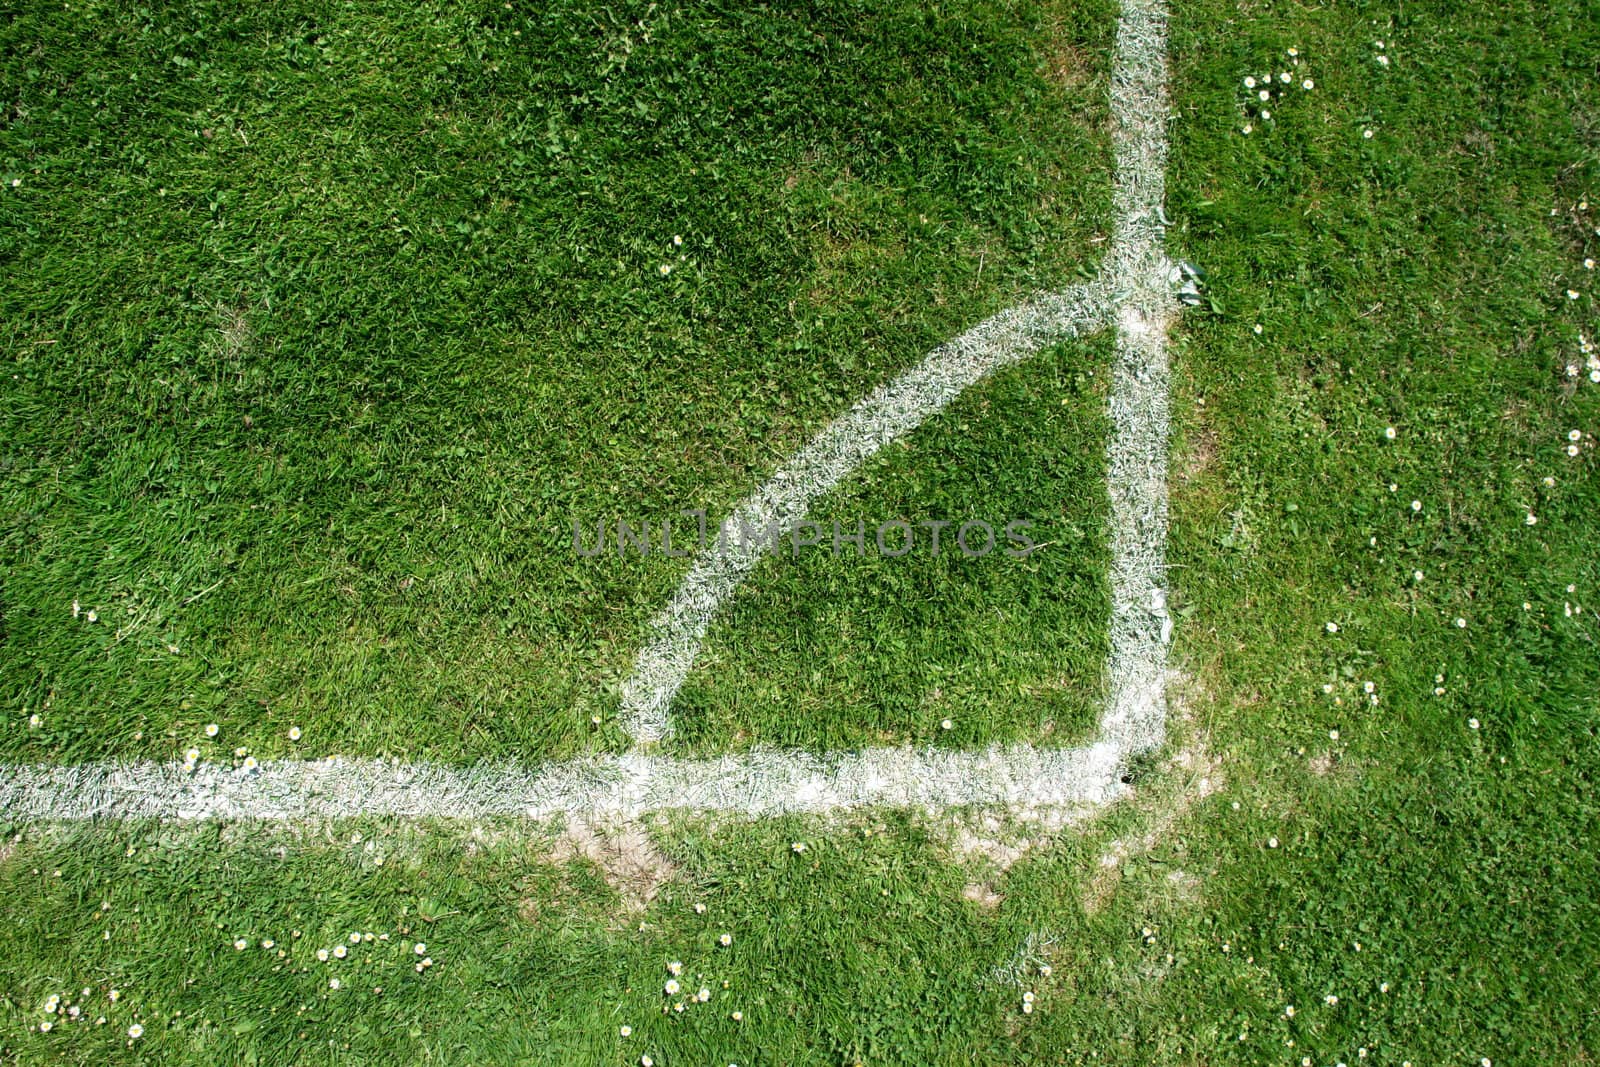 soccer field close-ups of markings on a sunny day